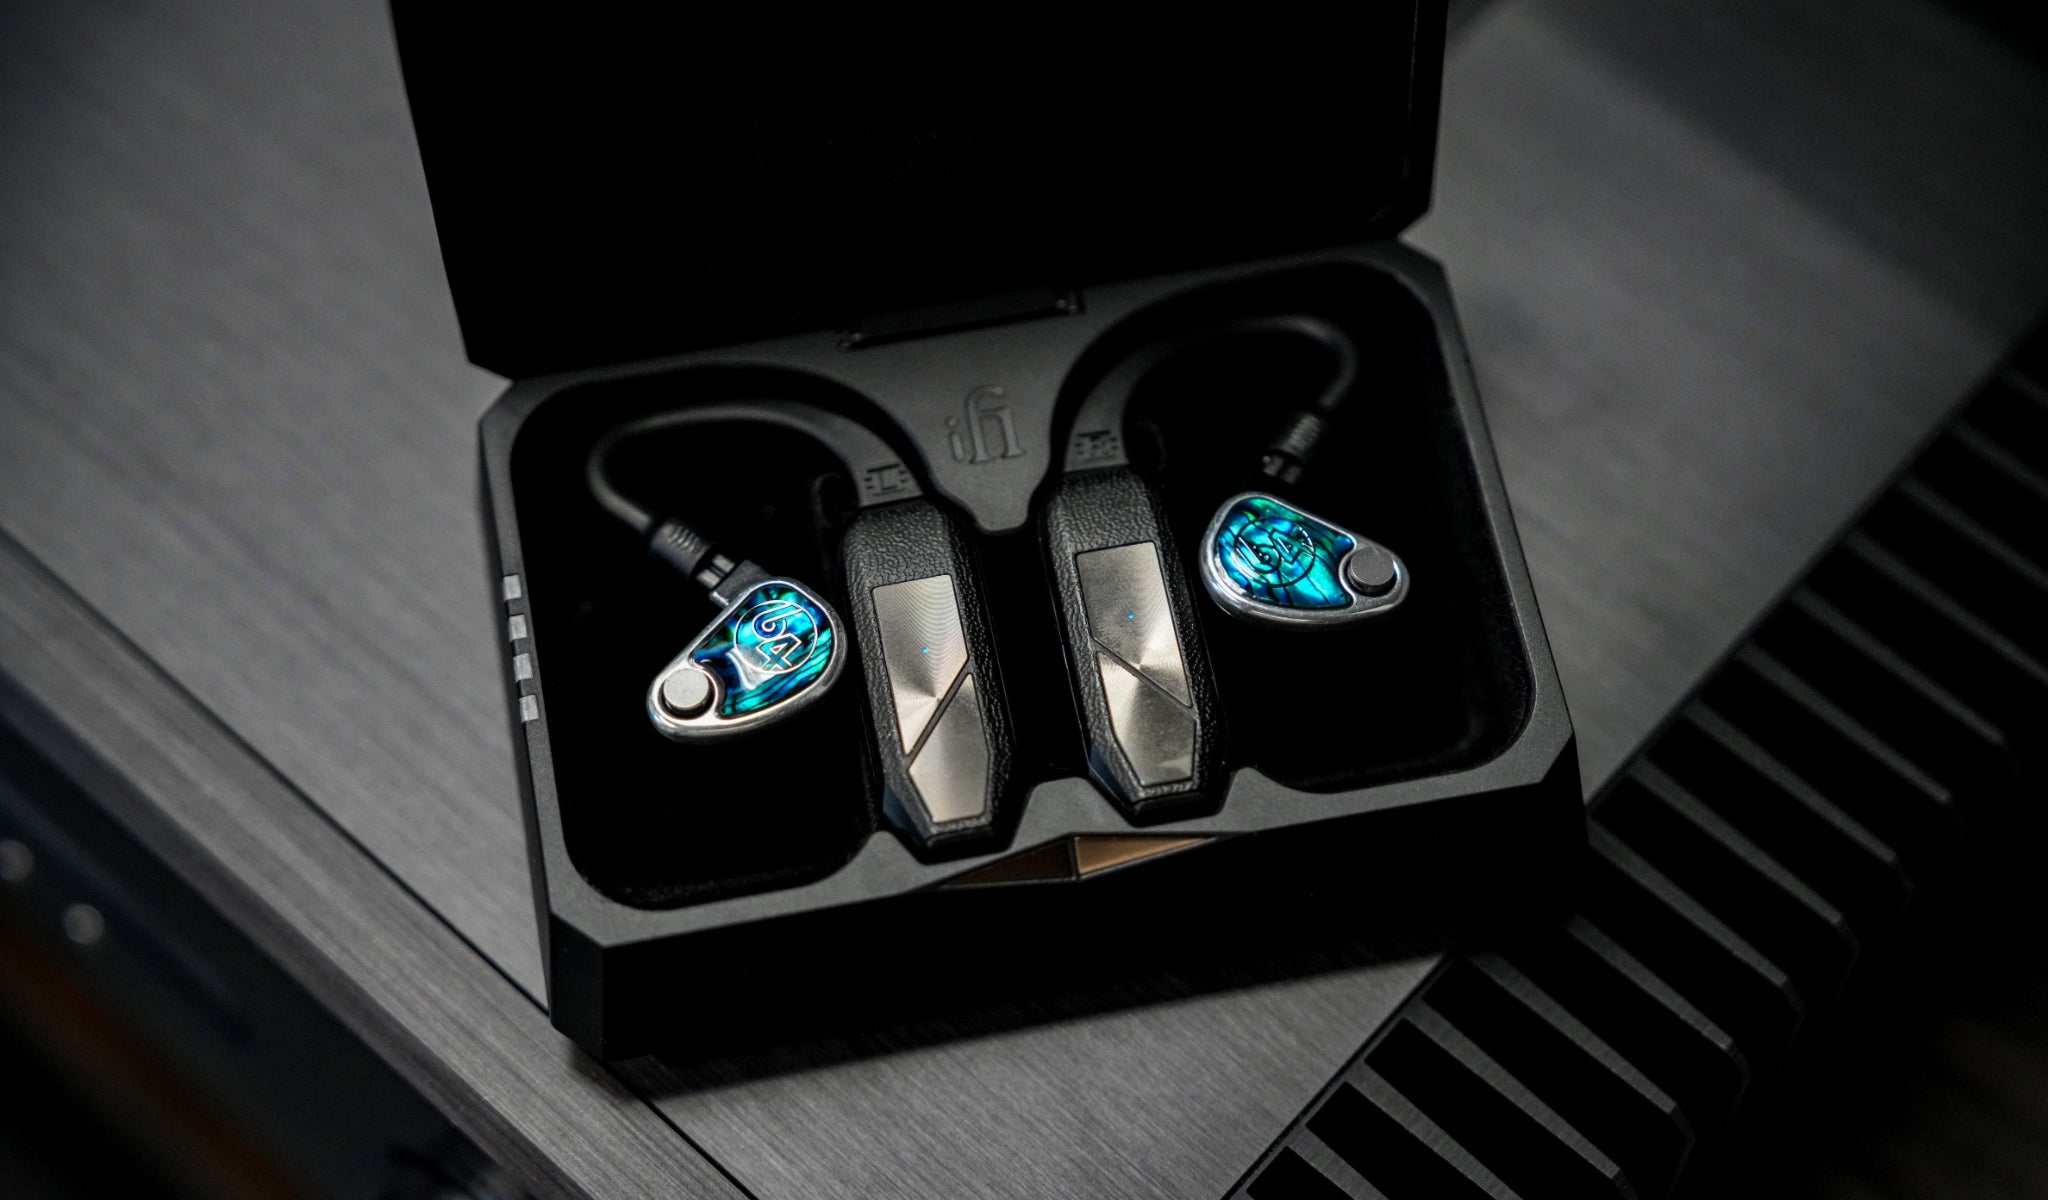 iFi GO Pods with attached 64 Audio earphones in charging case from Bloom Audio gallery